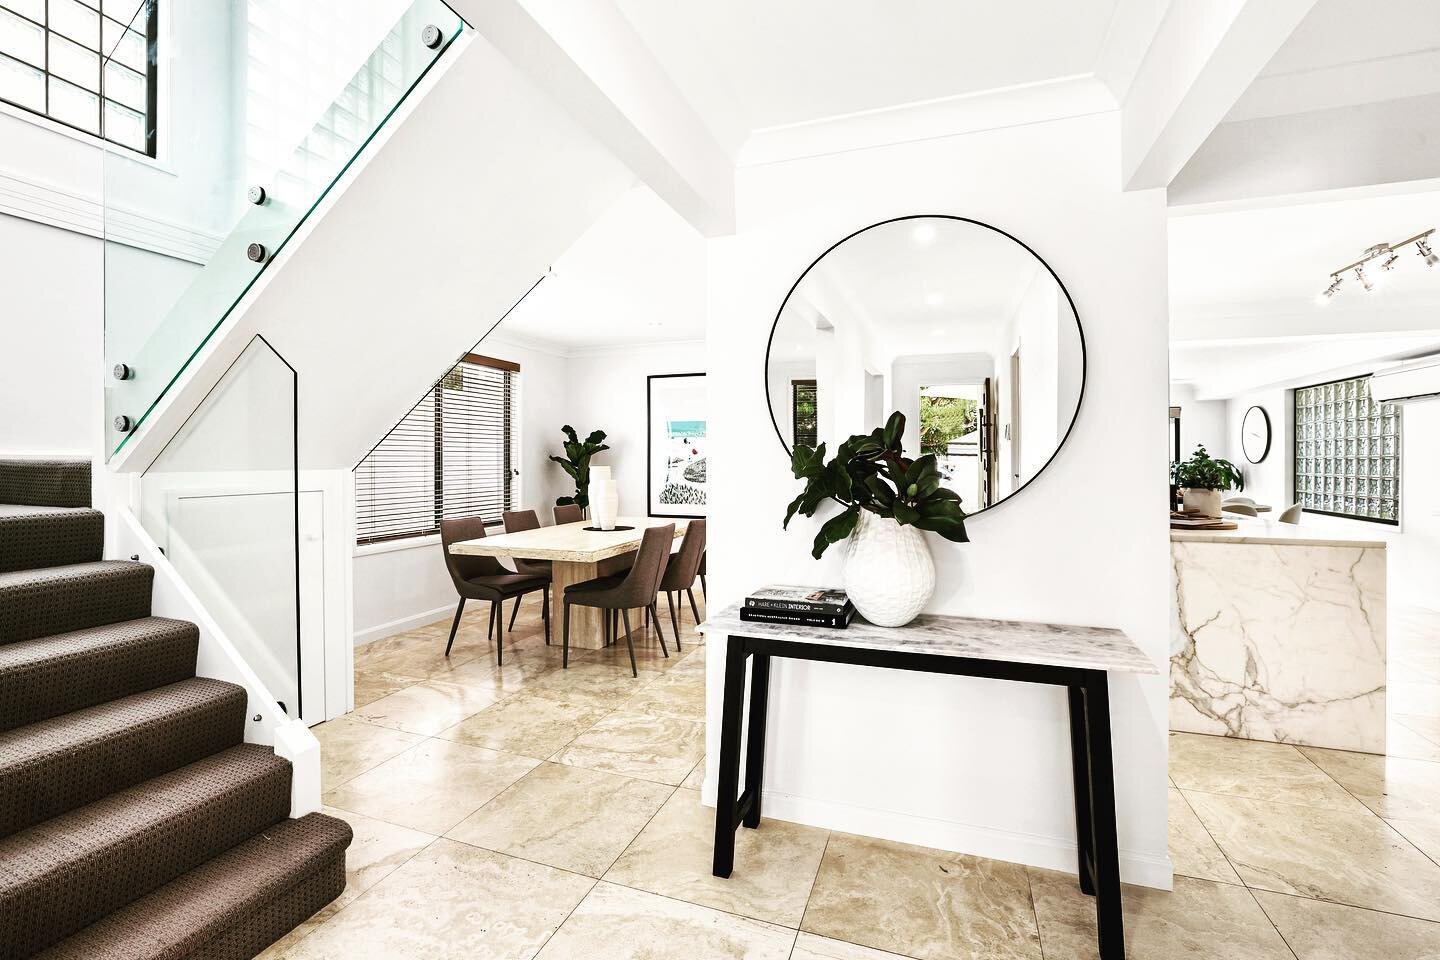 ENTRY: The first room the buyer will see, we make it count! ✨
A mirror will add shape, reflect and bounce light into a space. #propertystyling #interiorstyling #styletosell #homestaging #thefinishingtouchstyling #mirror #entryfoyerstyling #entry